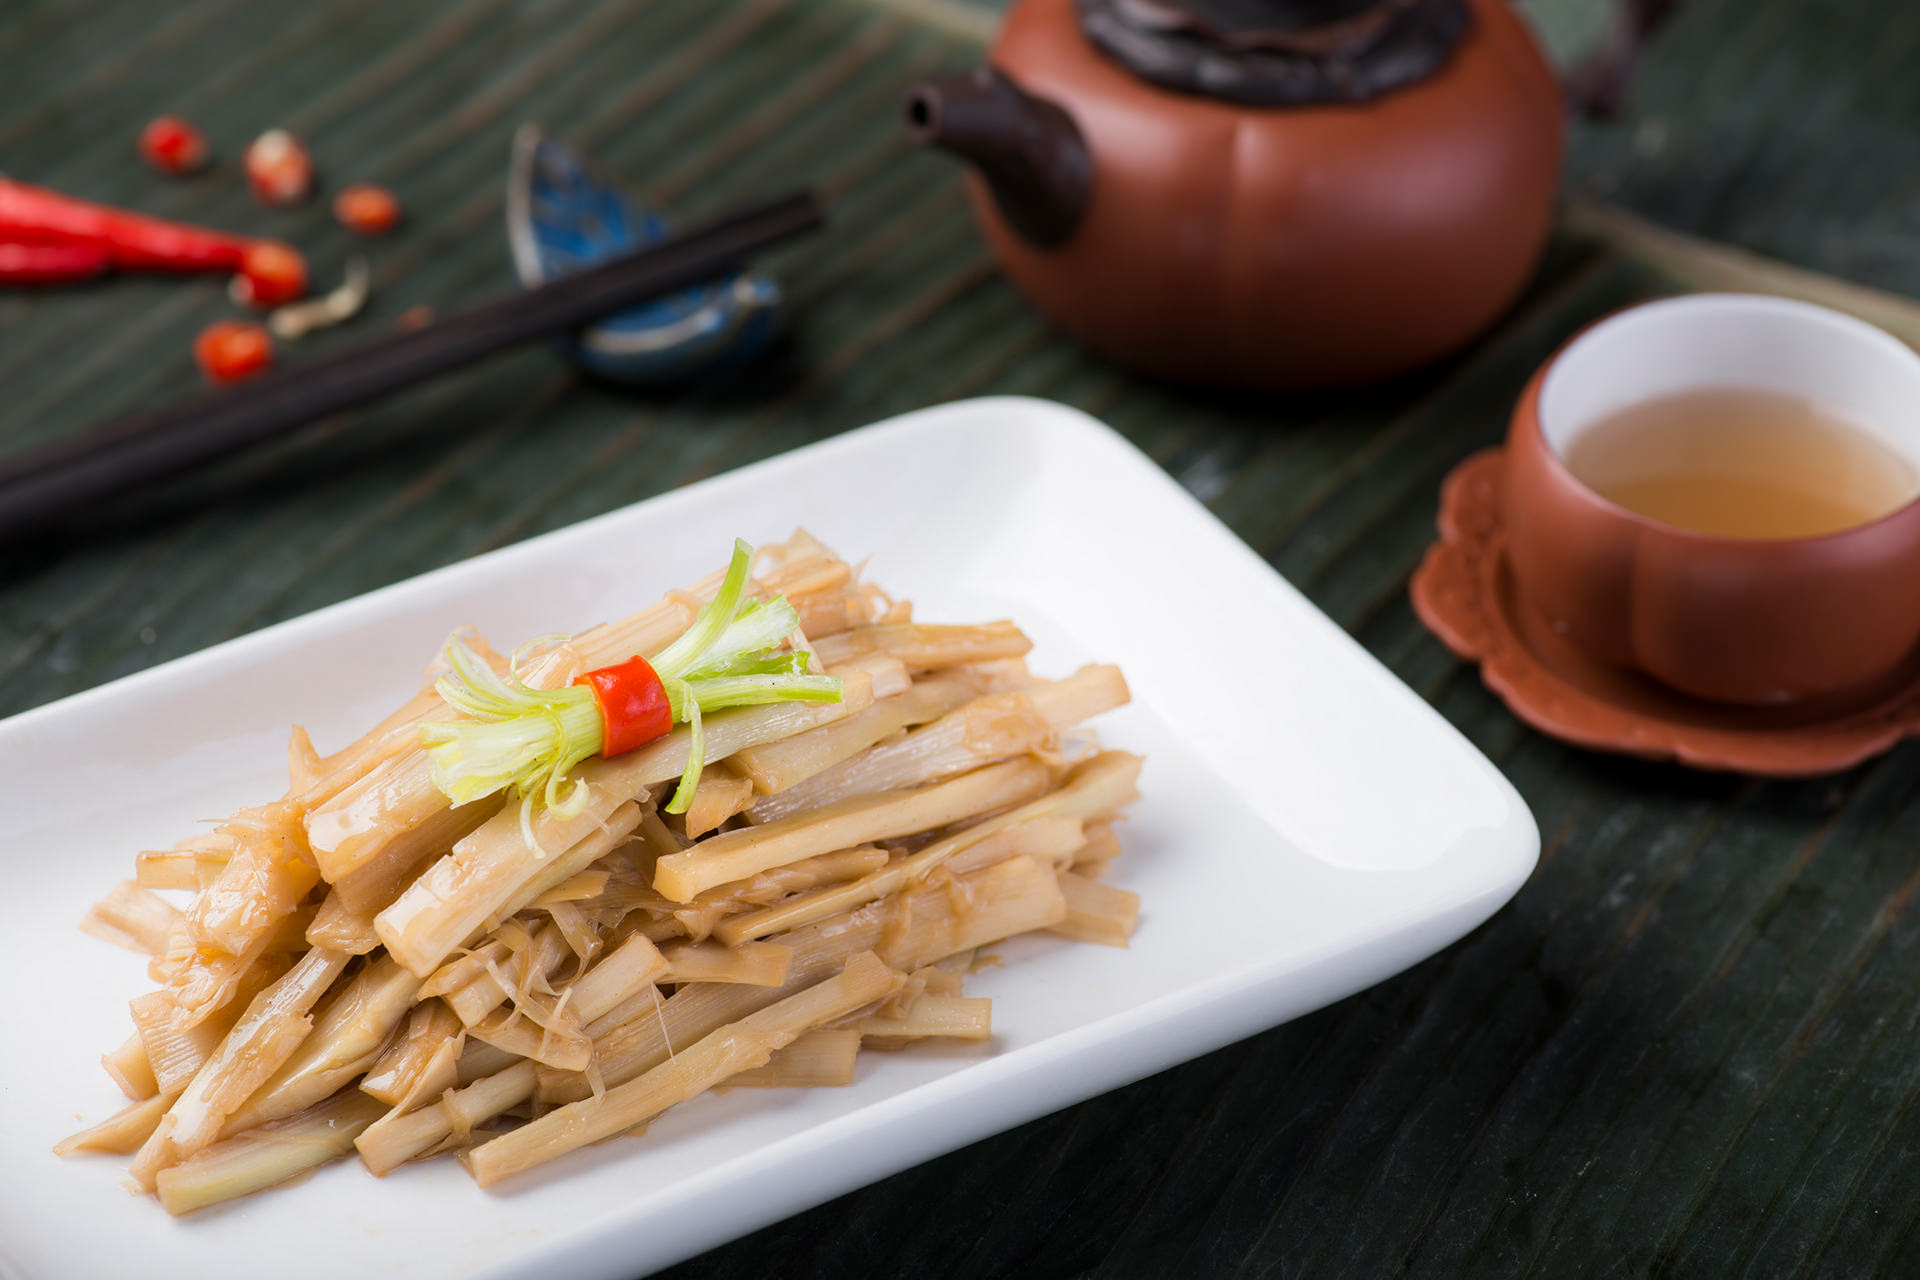 Braised Bamboo Shoots at Lee Chen Asian Bistro